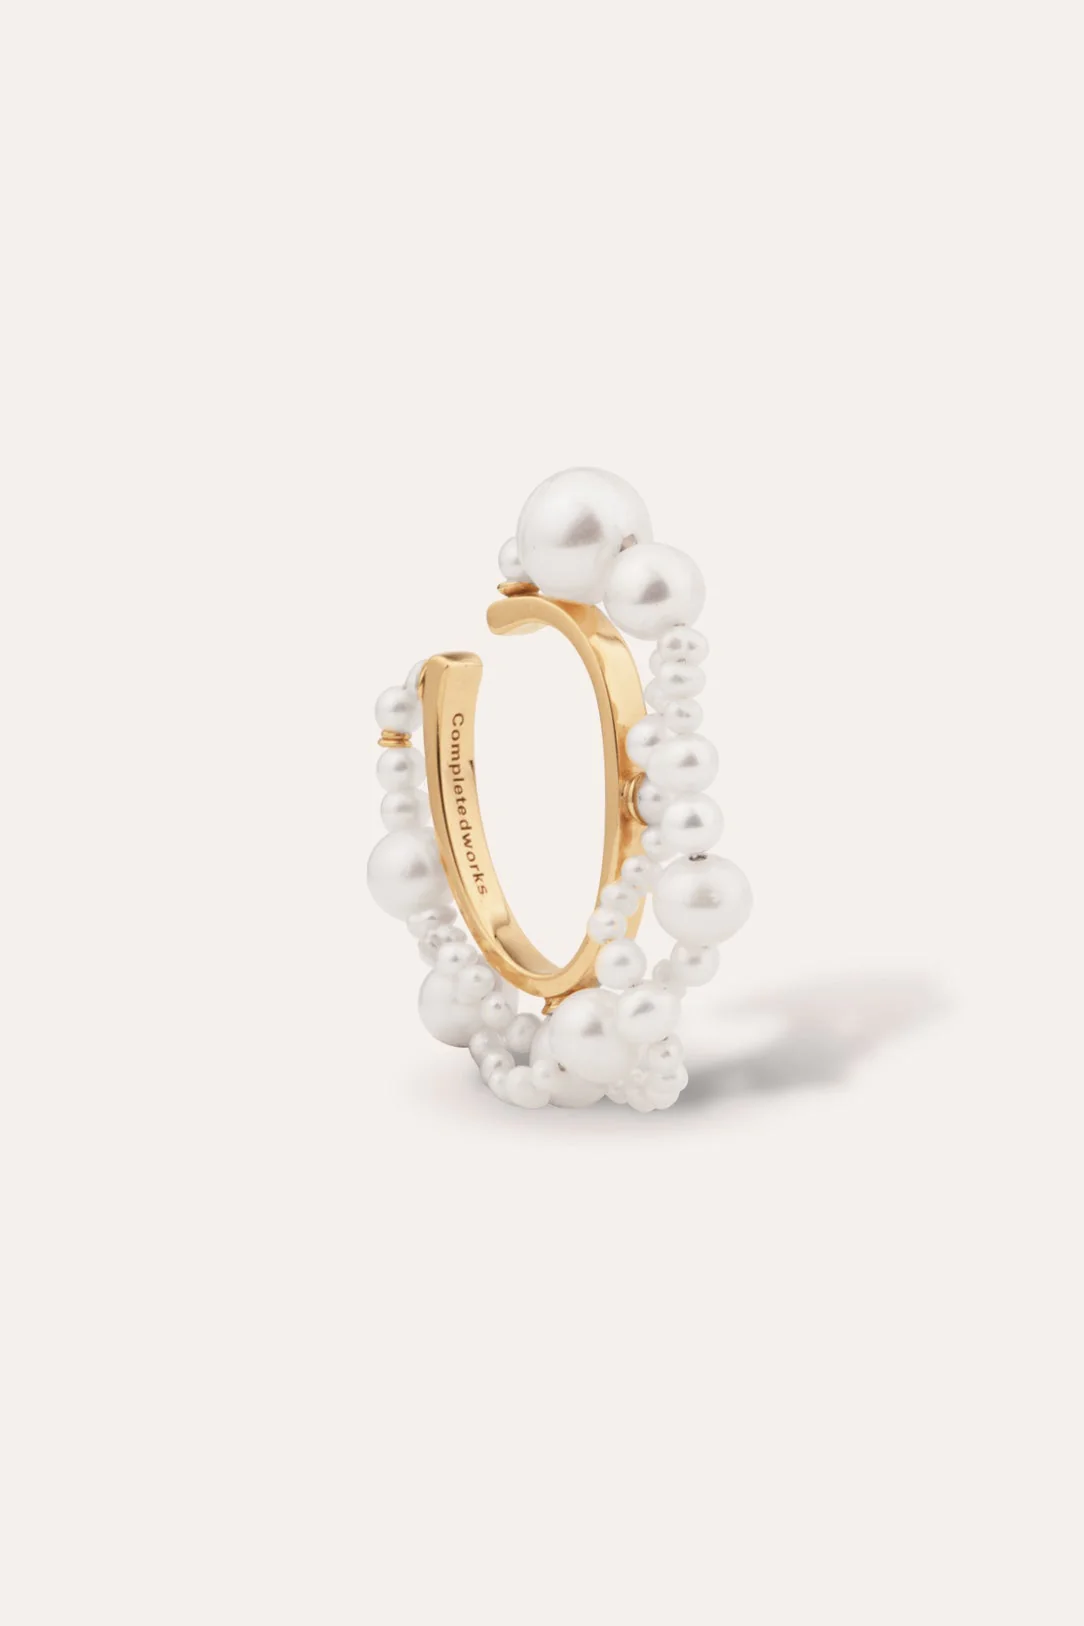 Product Image for Nimbus Pearl and Gold Vermeil Ear Cuff